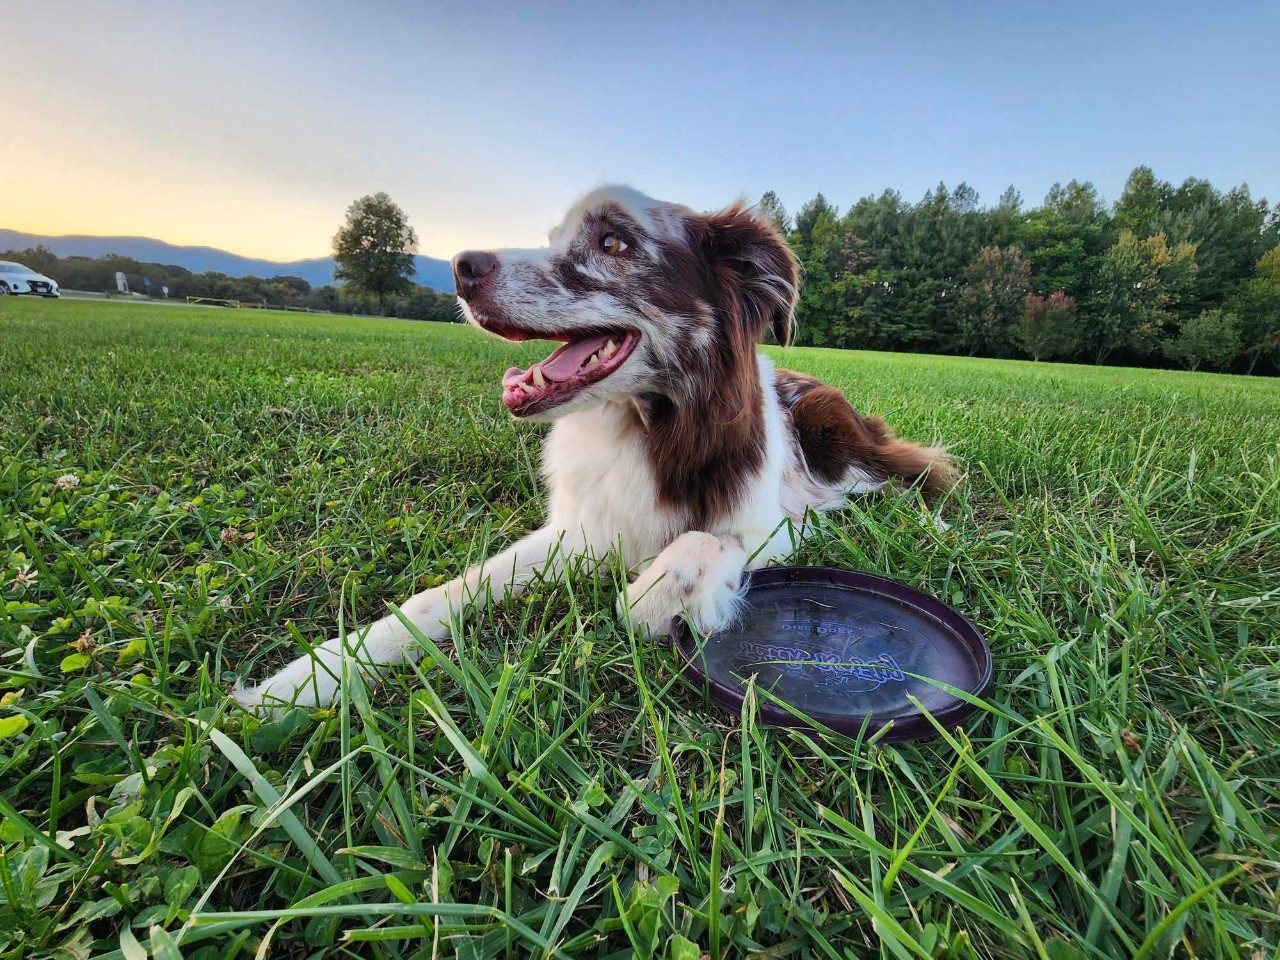 Dog laying in the grass with a frisbee.